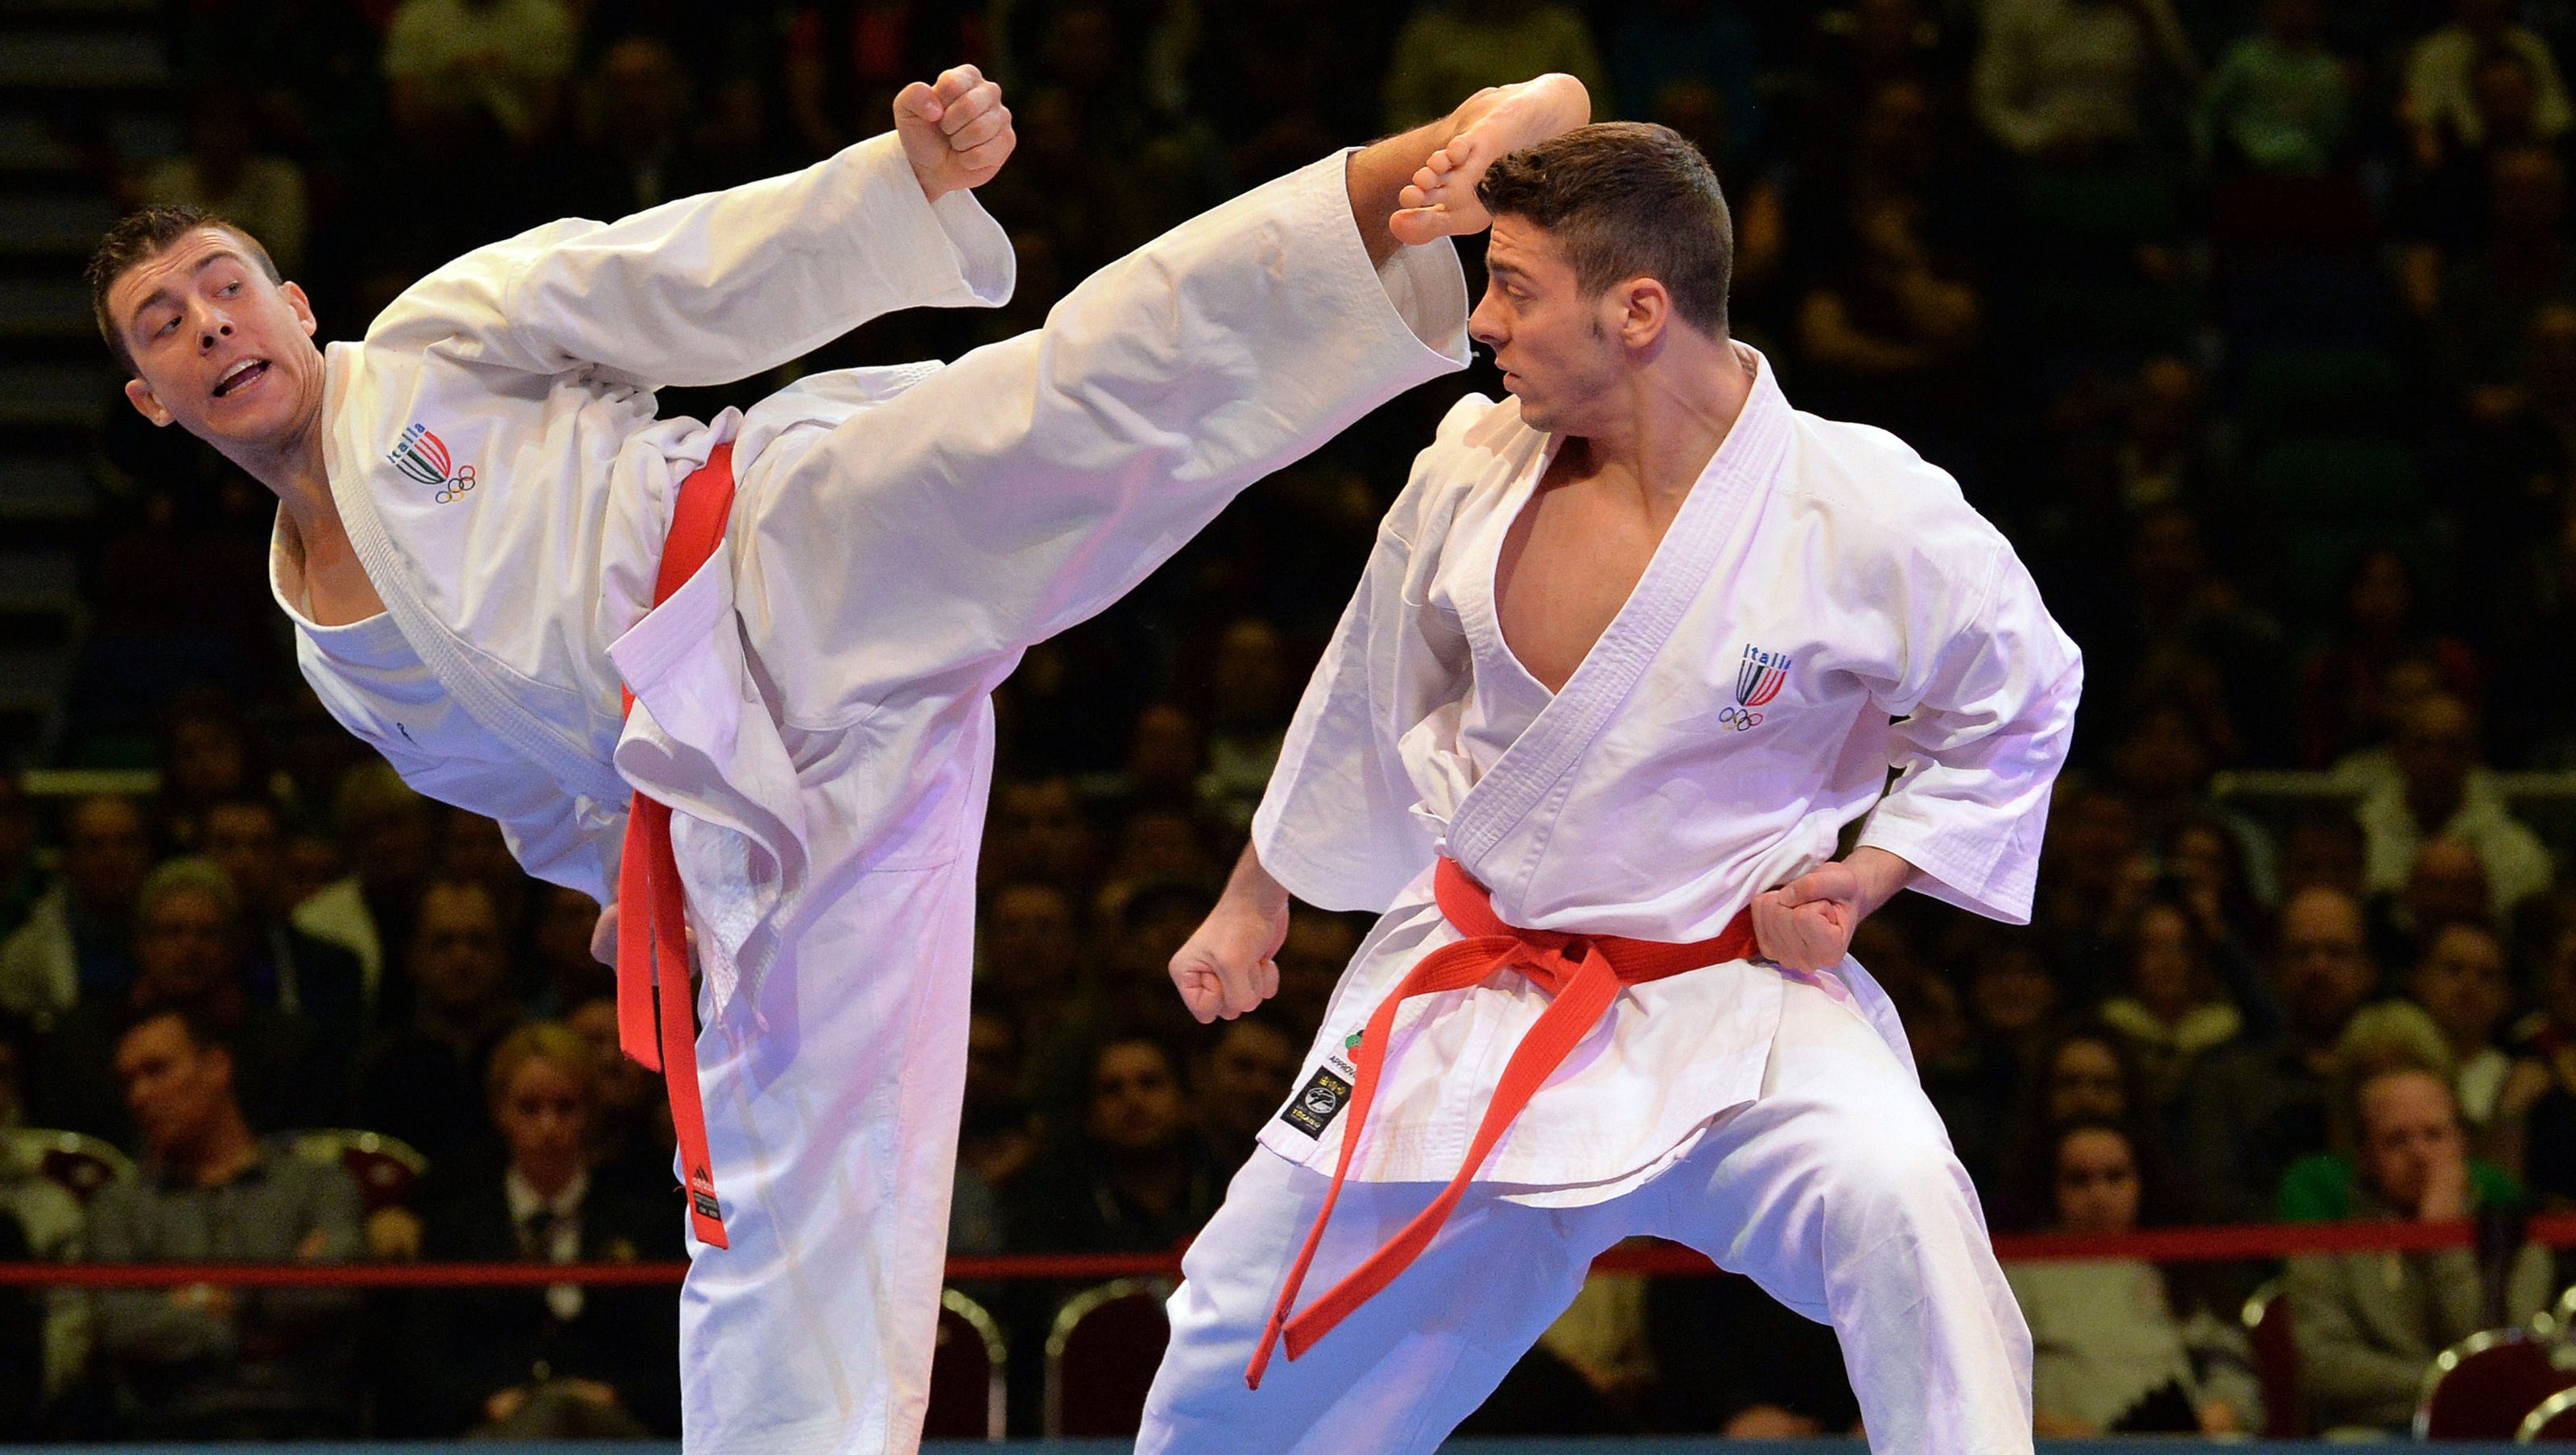 Karate bidding to be included in program at 2020 Olympics